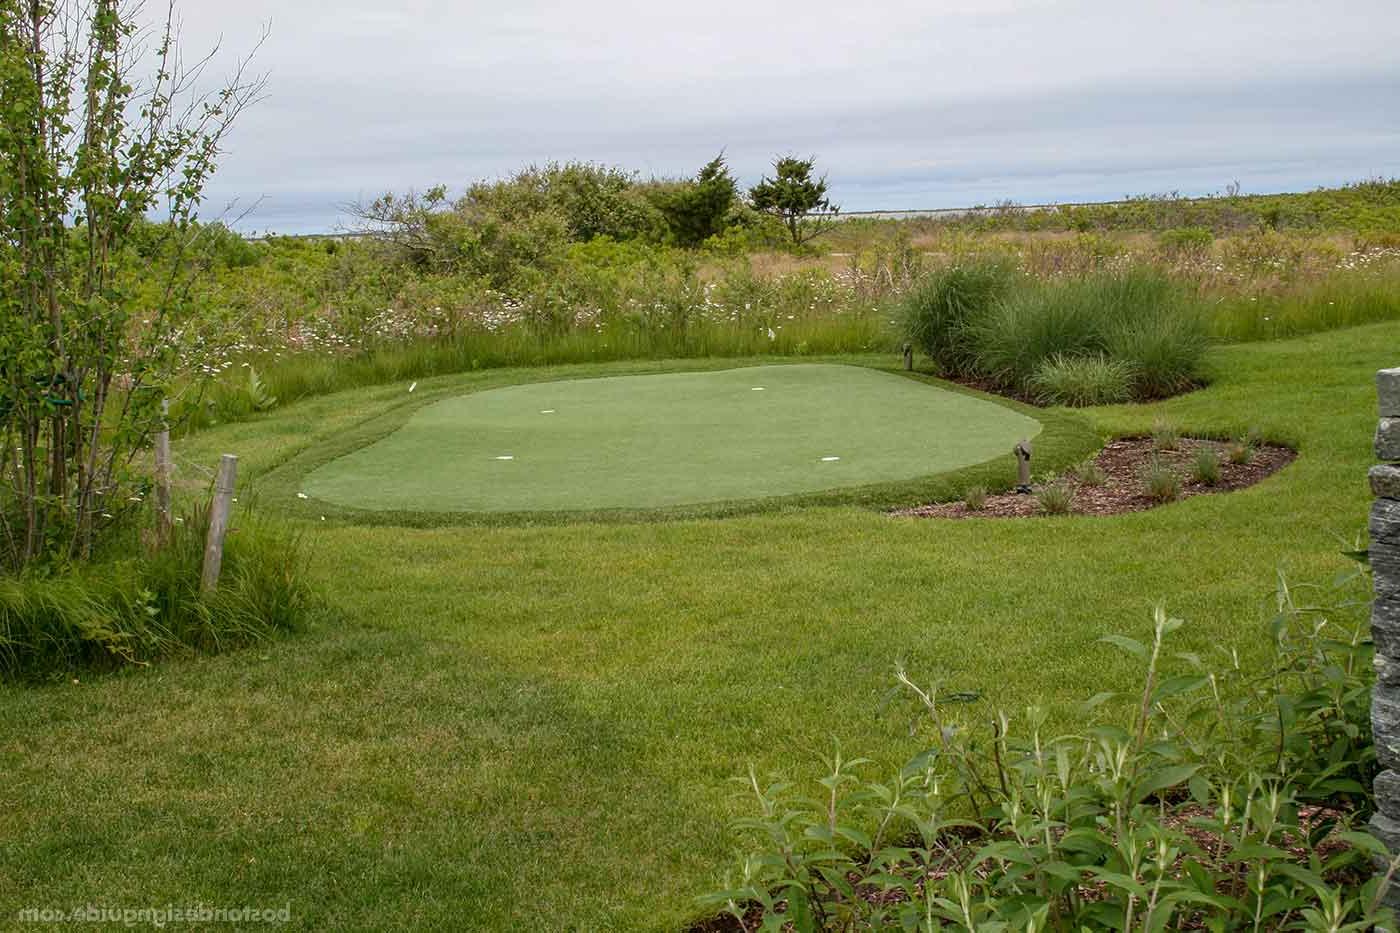 Residential putting green designed by Sudbury Design Group